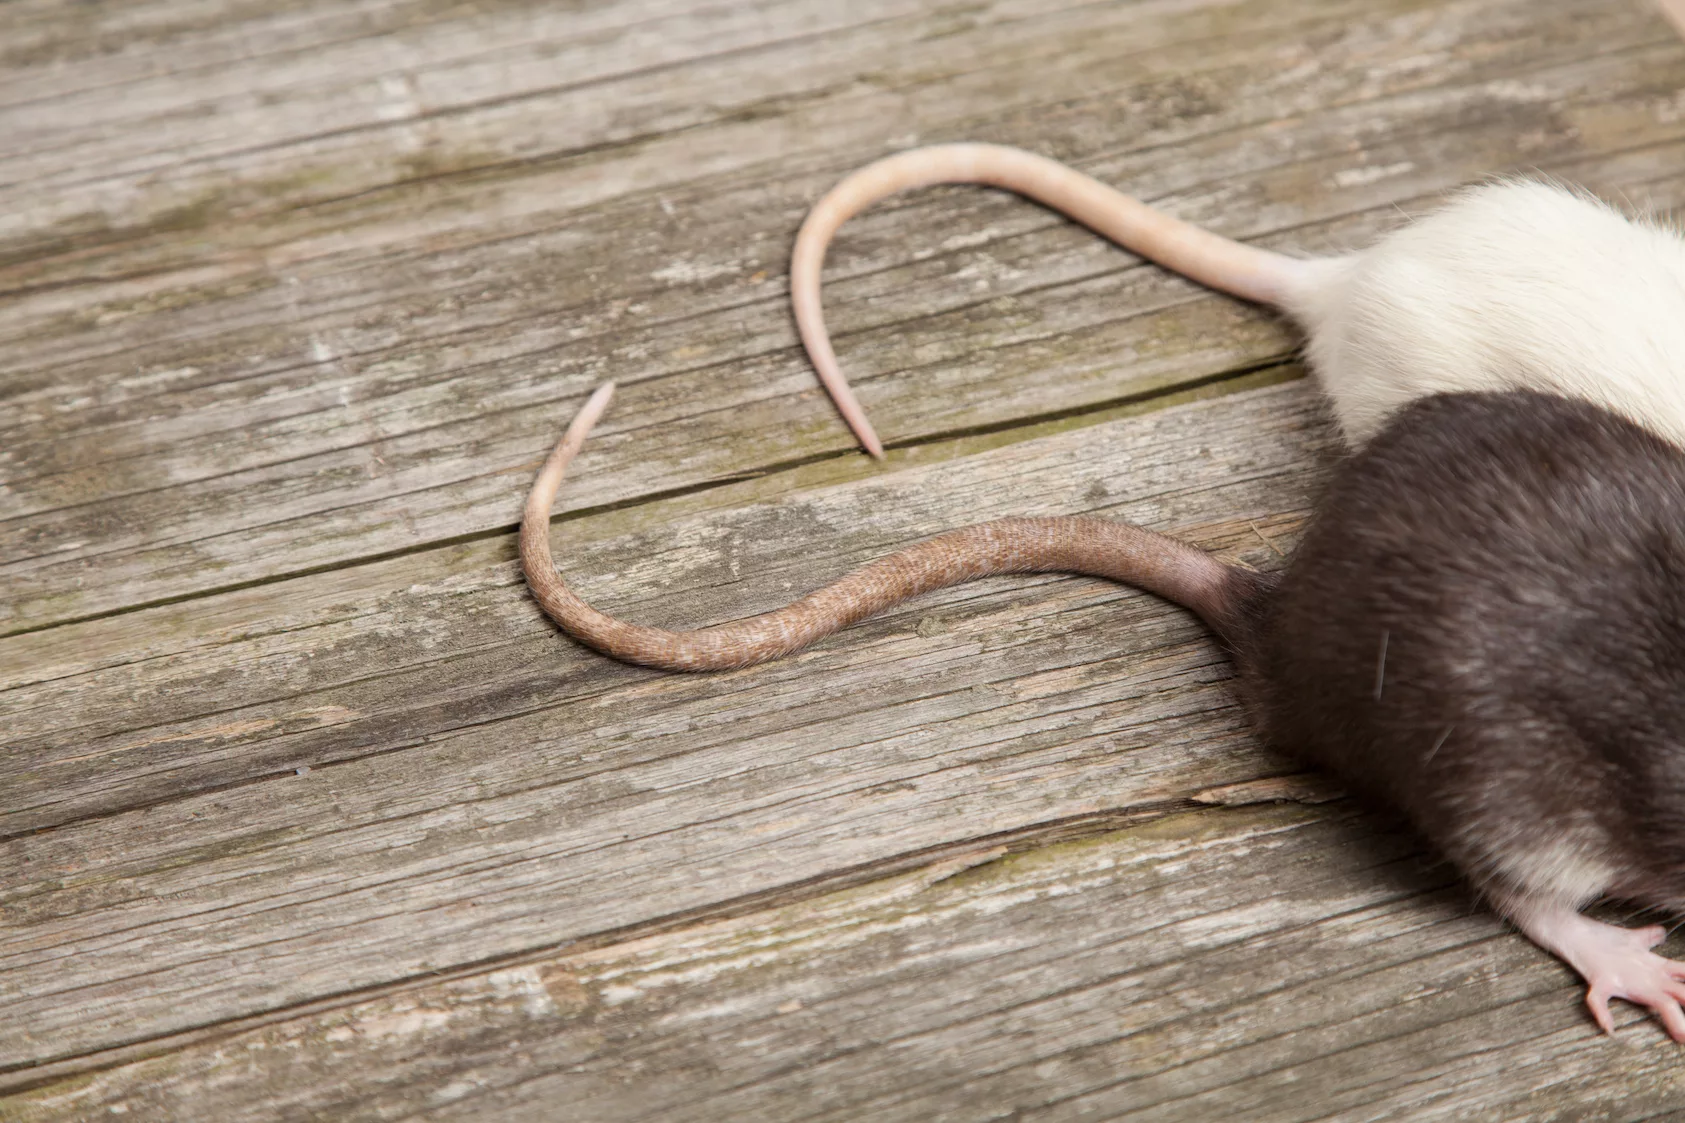 Put Down The Mouse Traps & Other DIY And Get Professional Pest Control